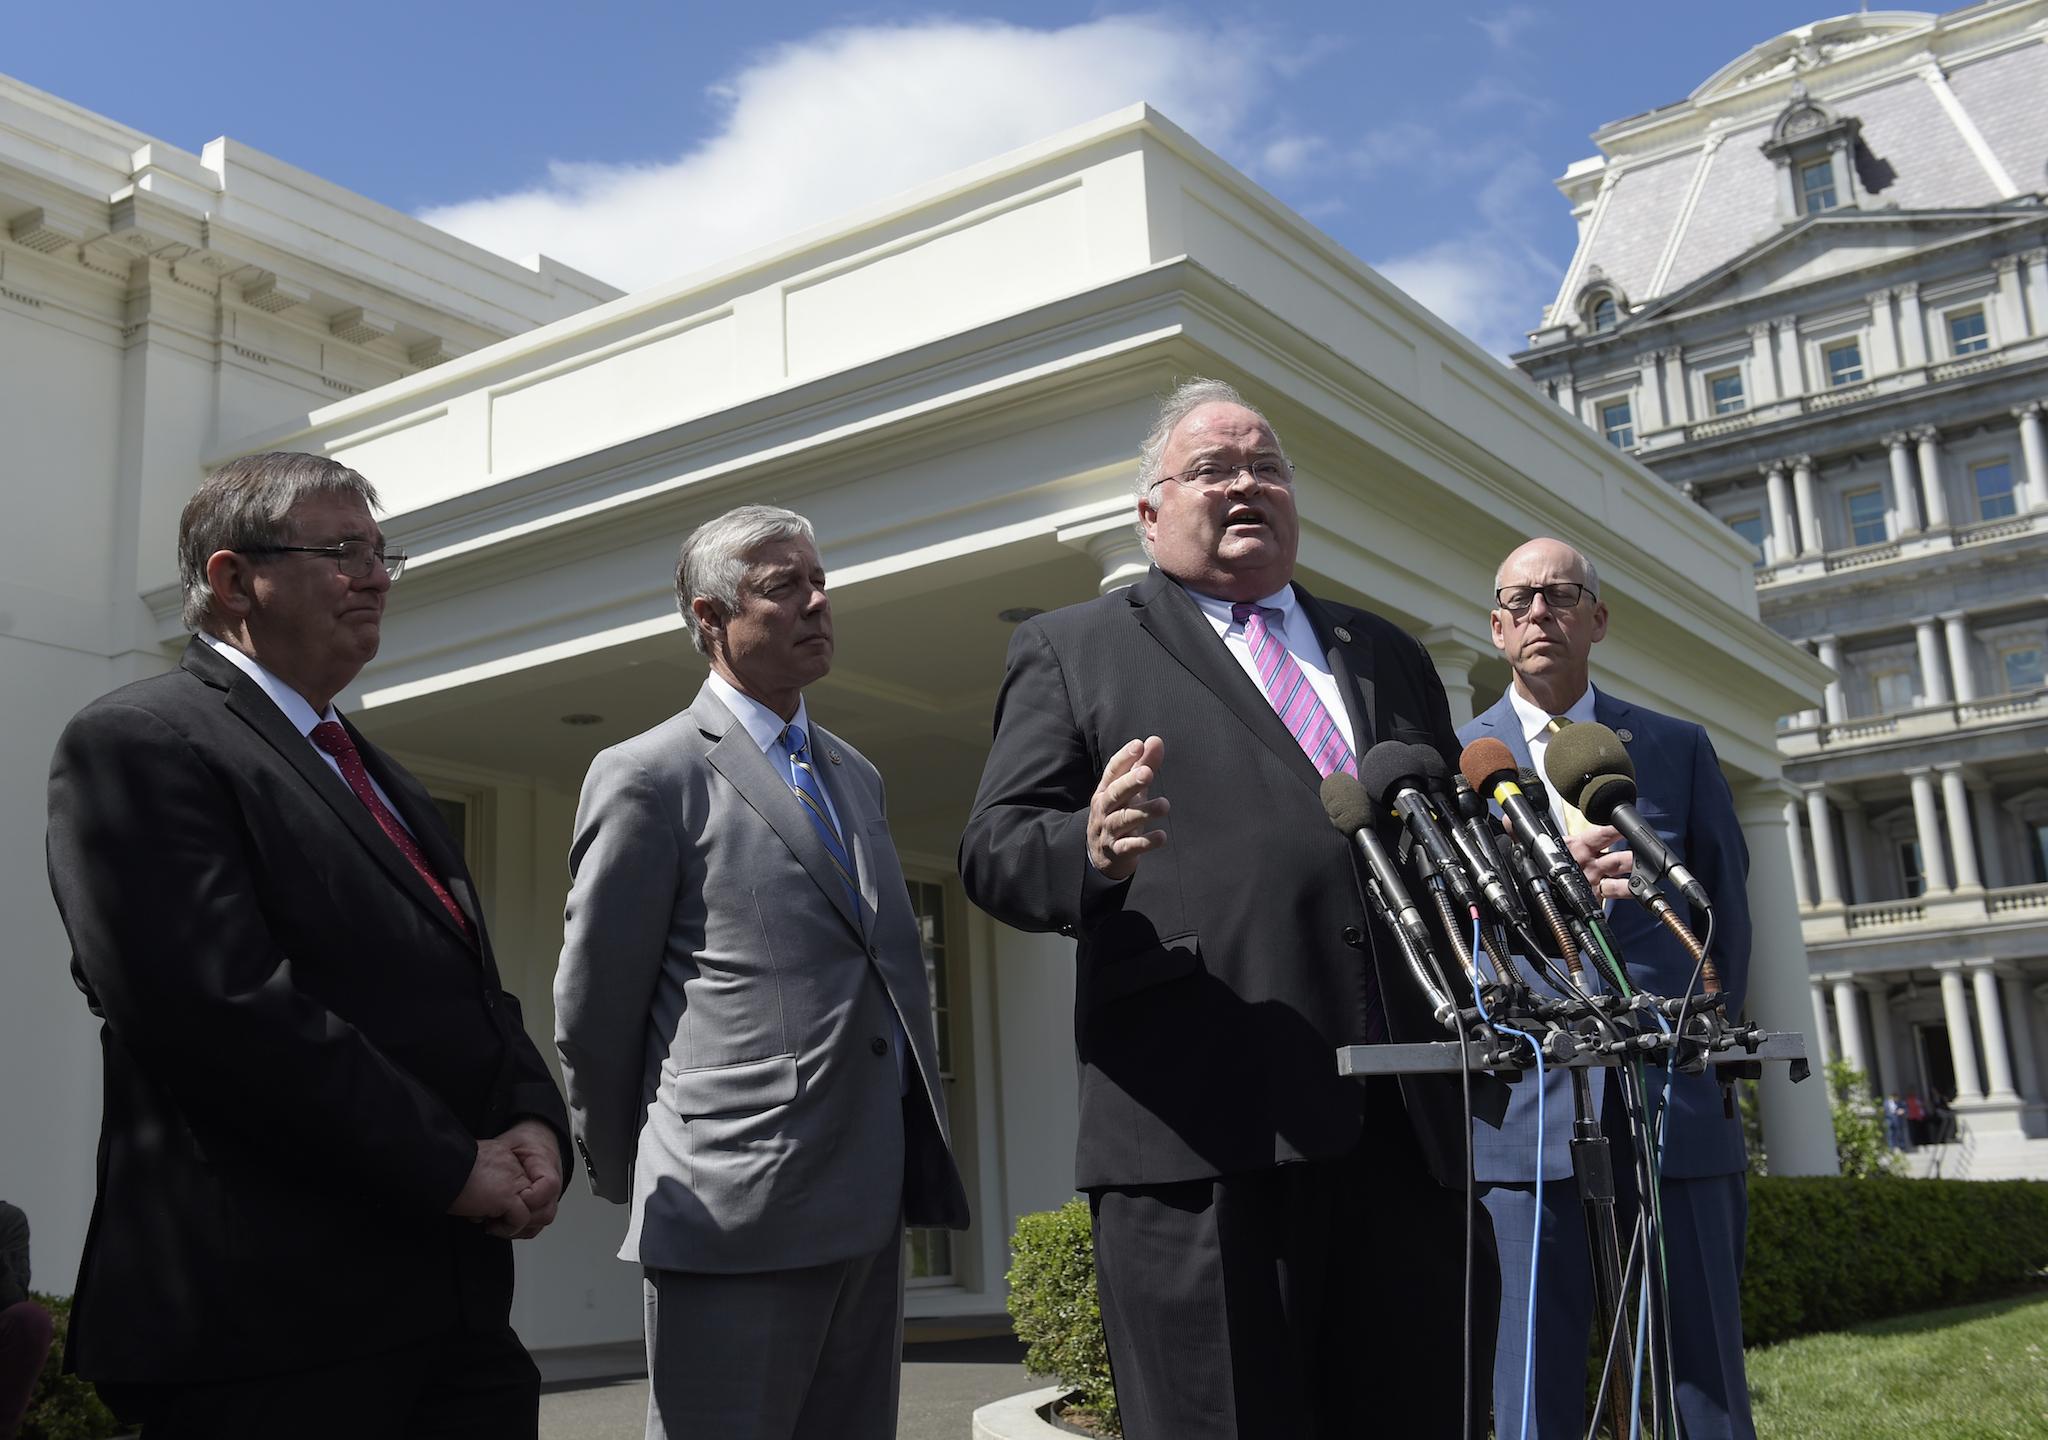 Representatives Billy Long, Michael Burgess, Fred Upton and Greg Walden speak to reporters at the White House.